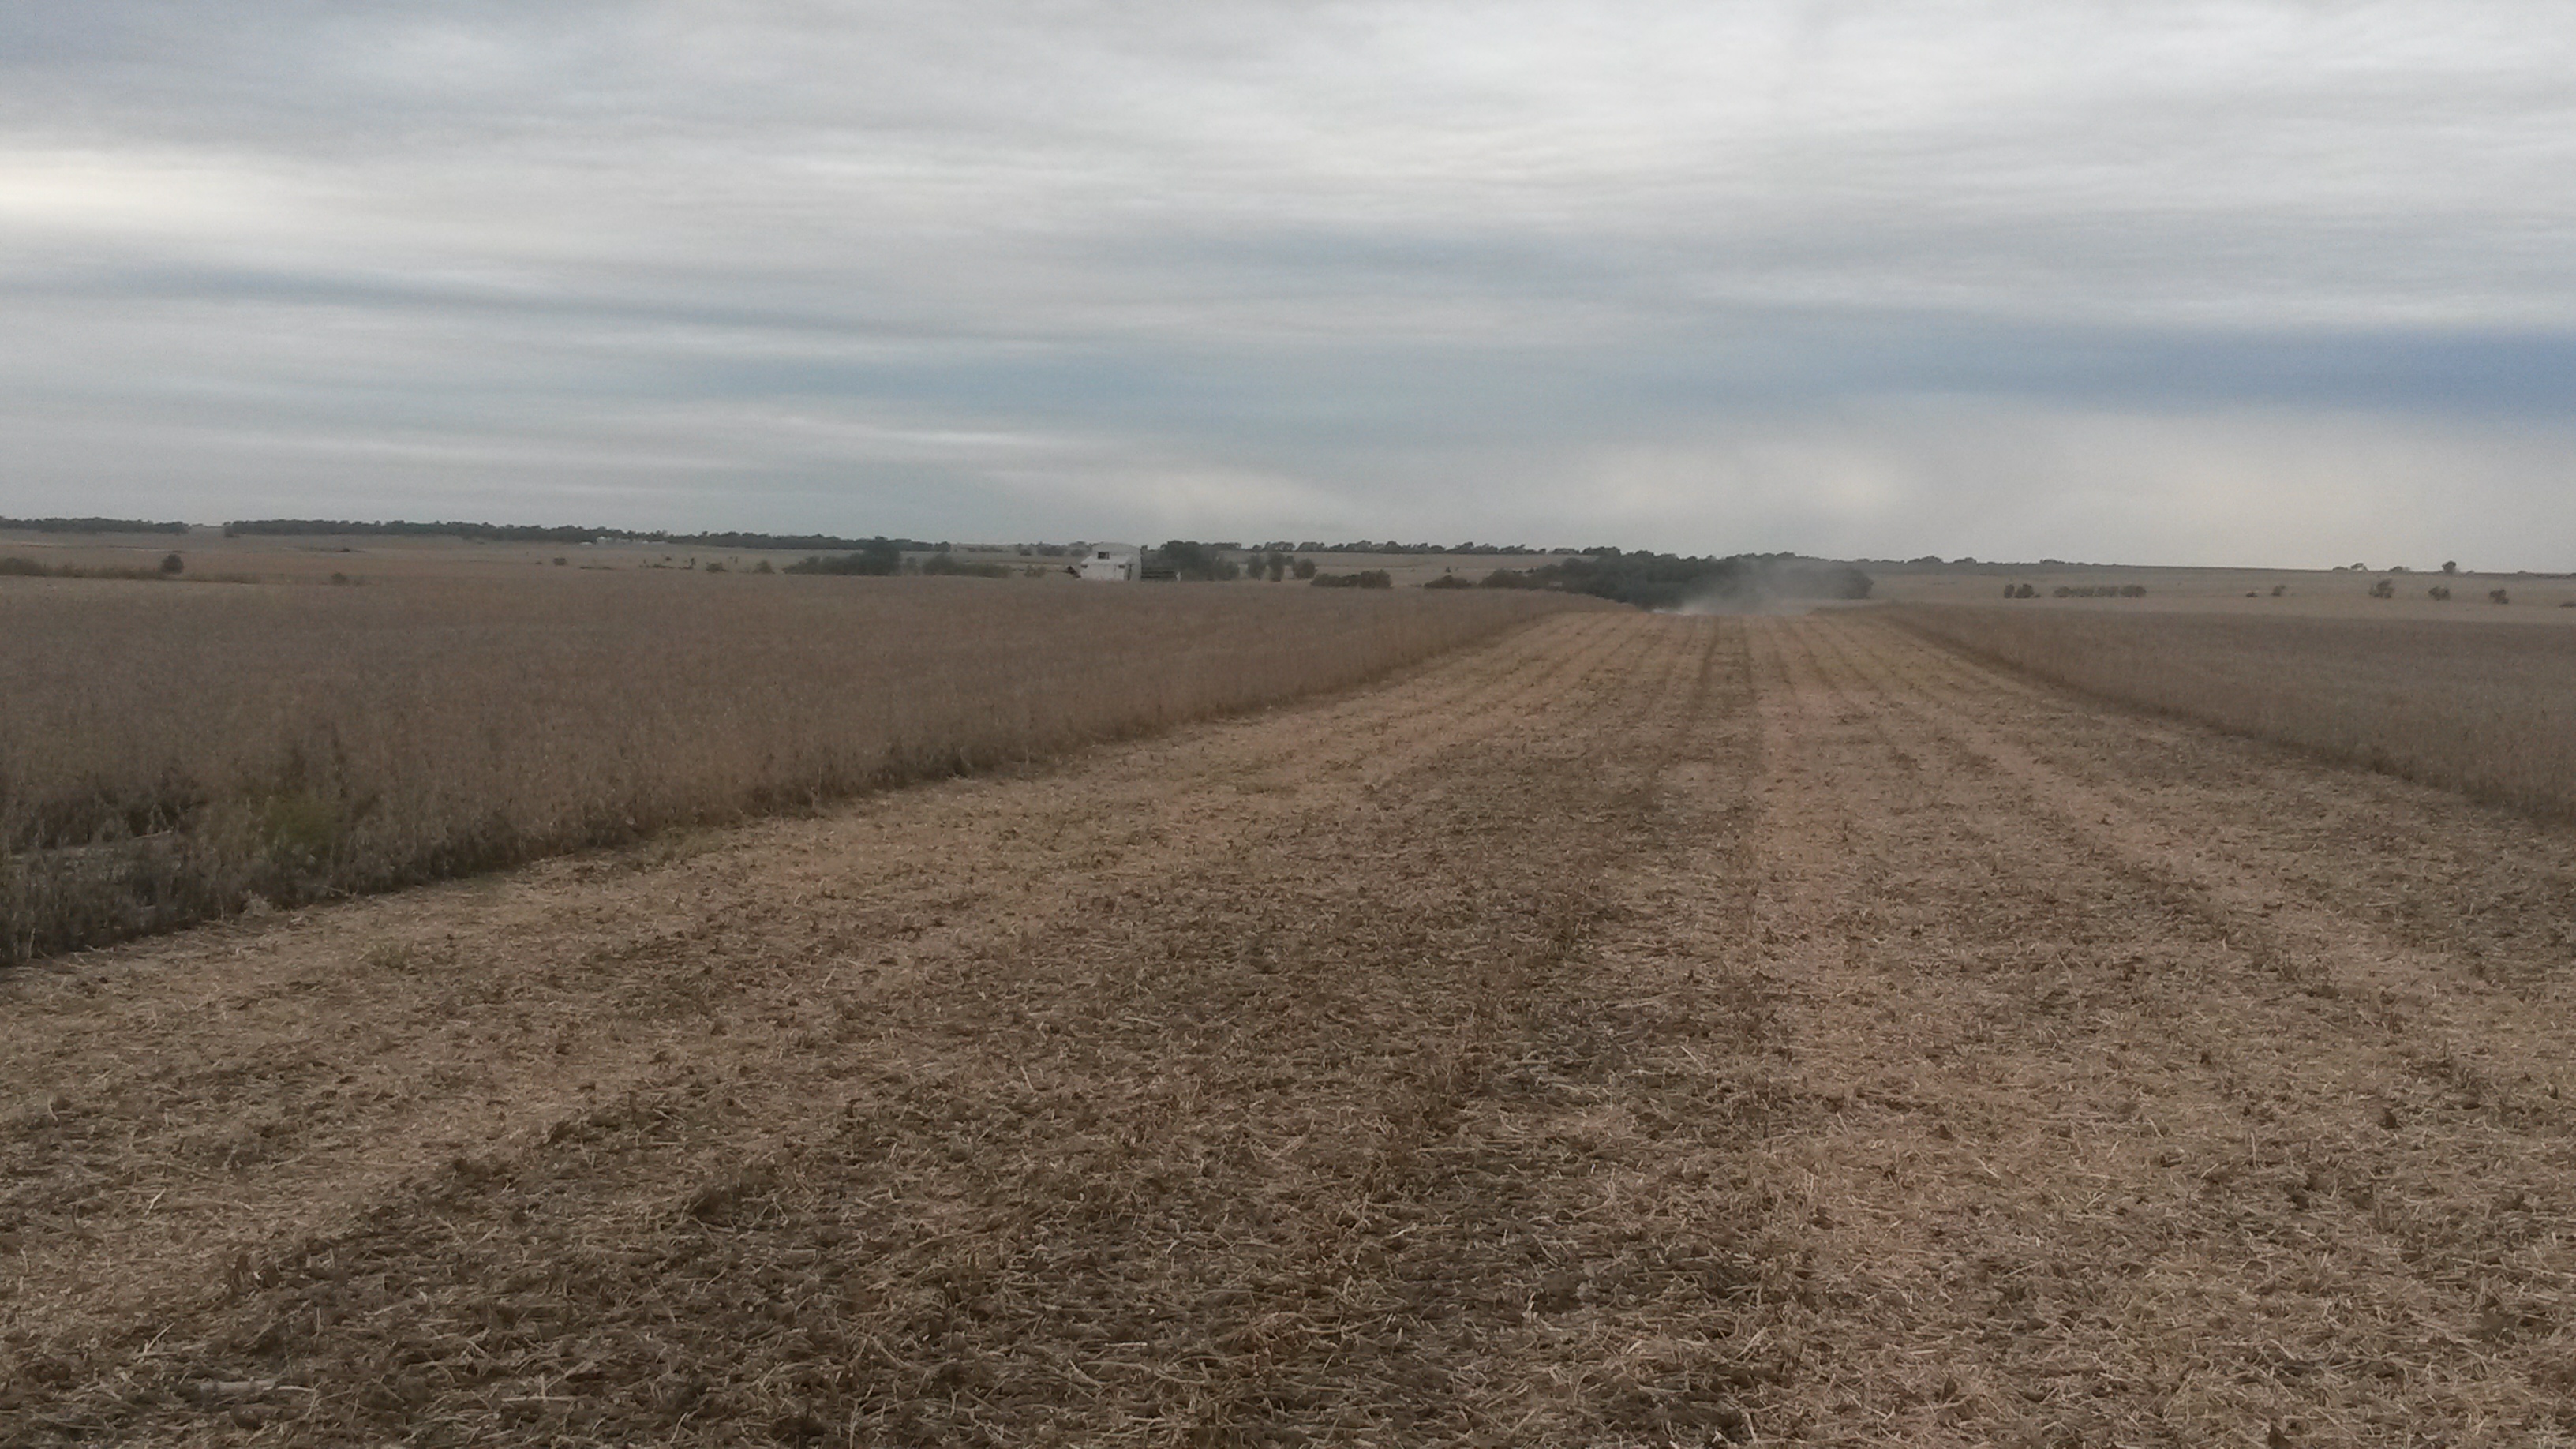 A large soybean field being harvested. About half the field is harvested.